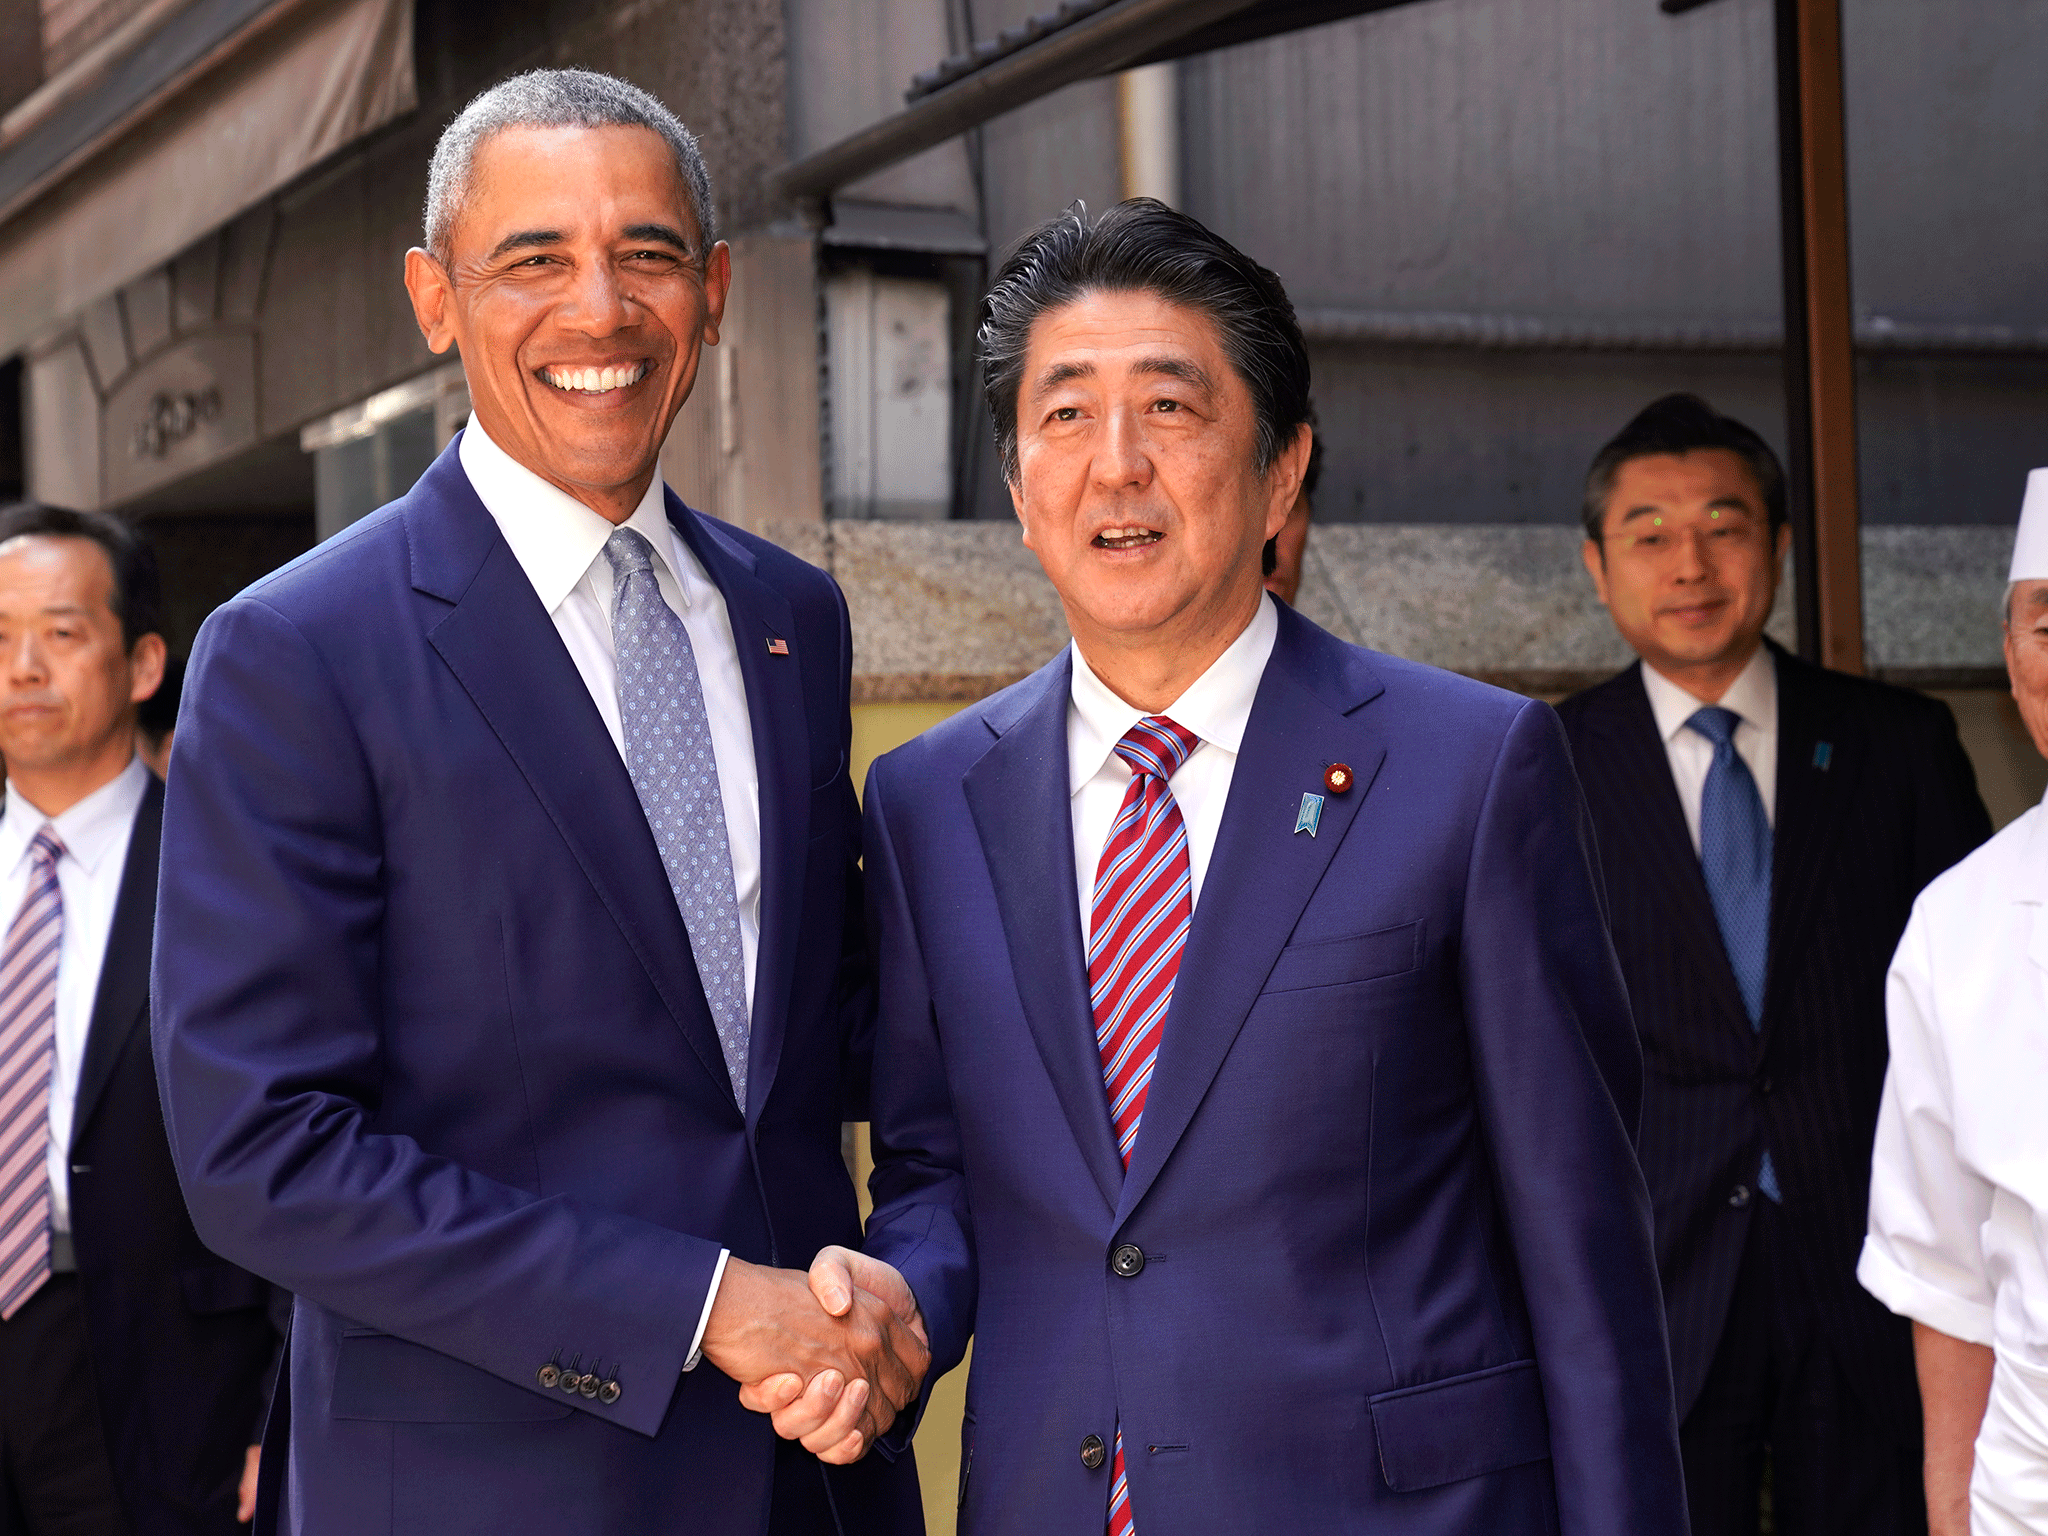 Barack Obama and Japanese Prime Minister Shinzo Abe pose for photographers in front of Japanese Sushi restaurant in Tokyo's Ginza shopping district